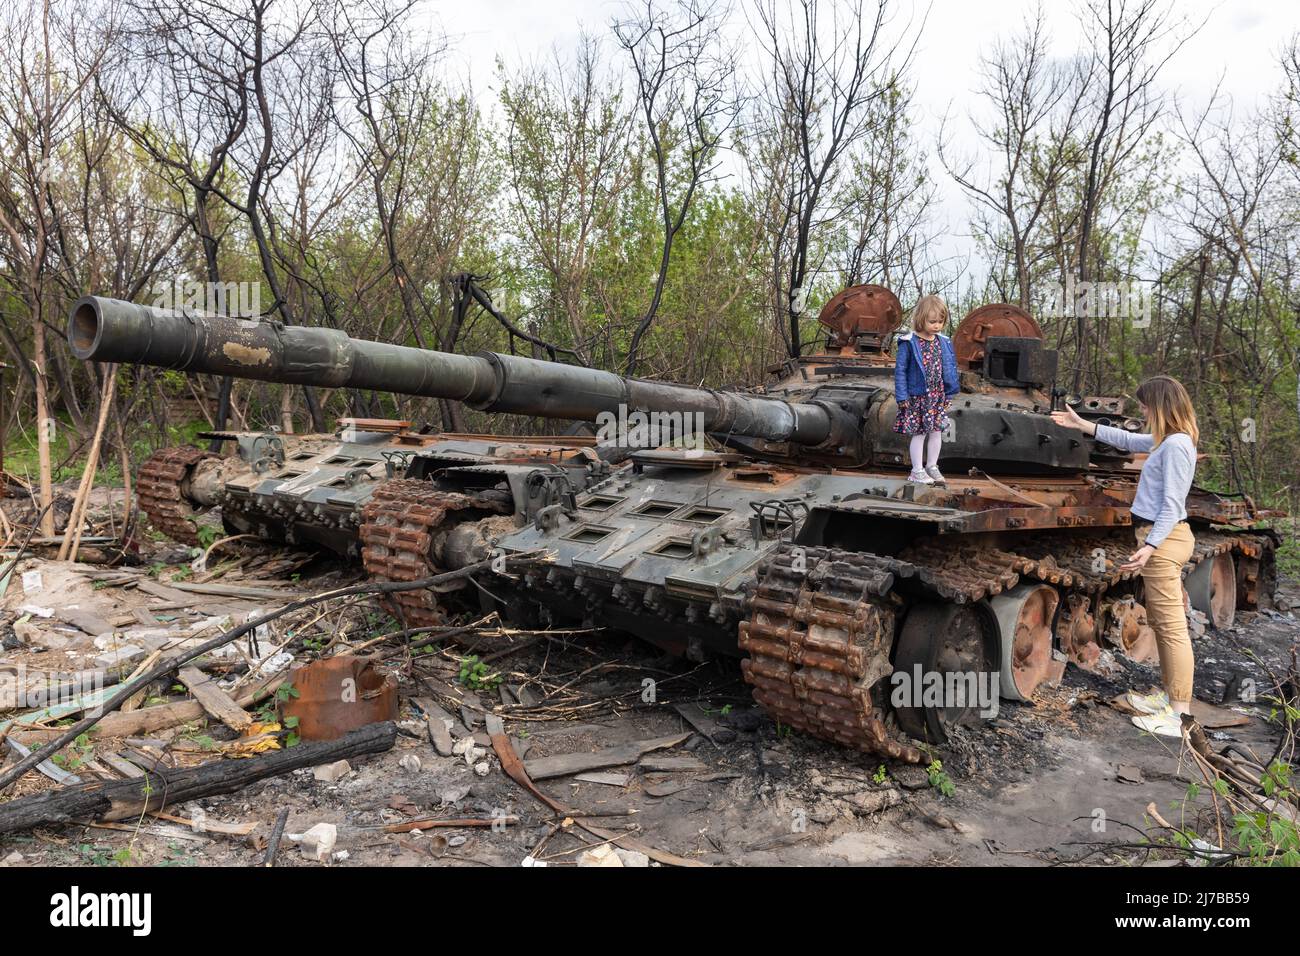 A girl stands on the tower of a destroyed Russian tank near Makariv village, Kyiv region. Russia invaded Ukraine on 24 February 2022, triggering the largest military attack in Europe since World War II. Stock Photo